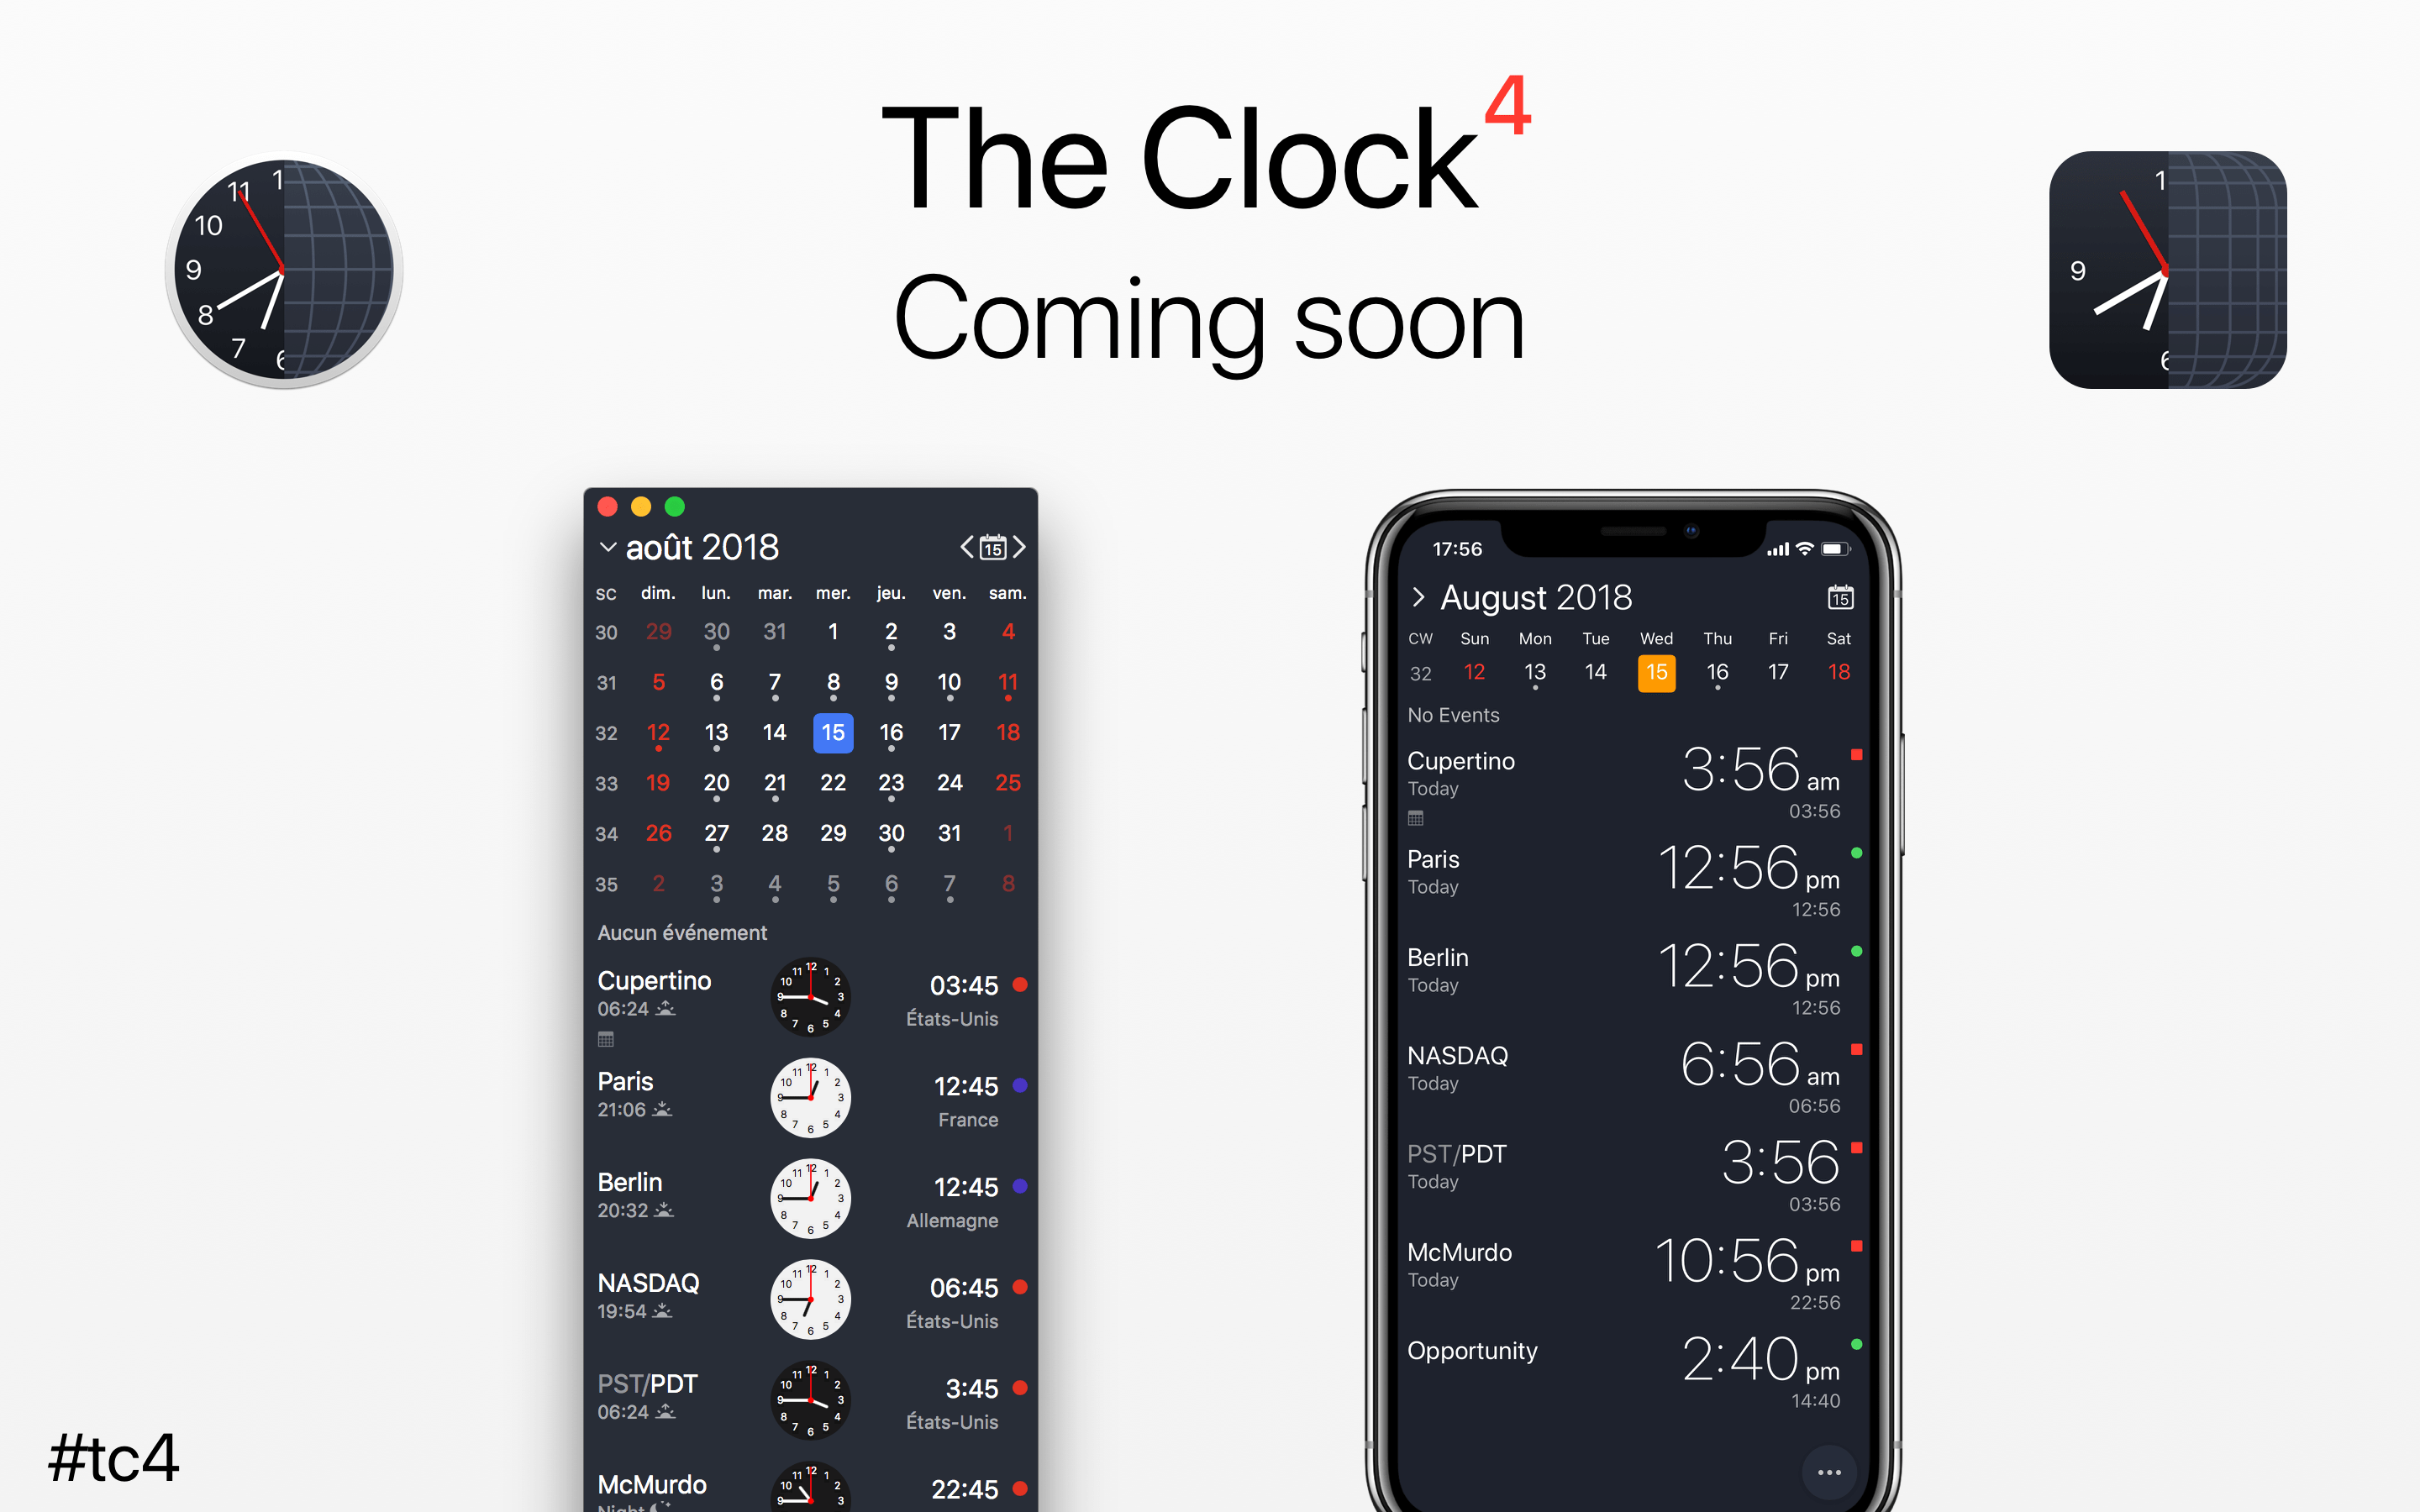 The Clock 4, coming soon